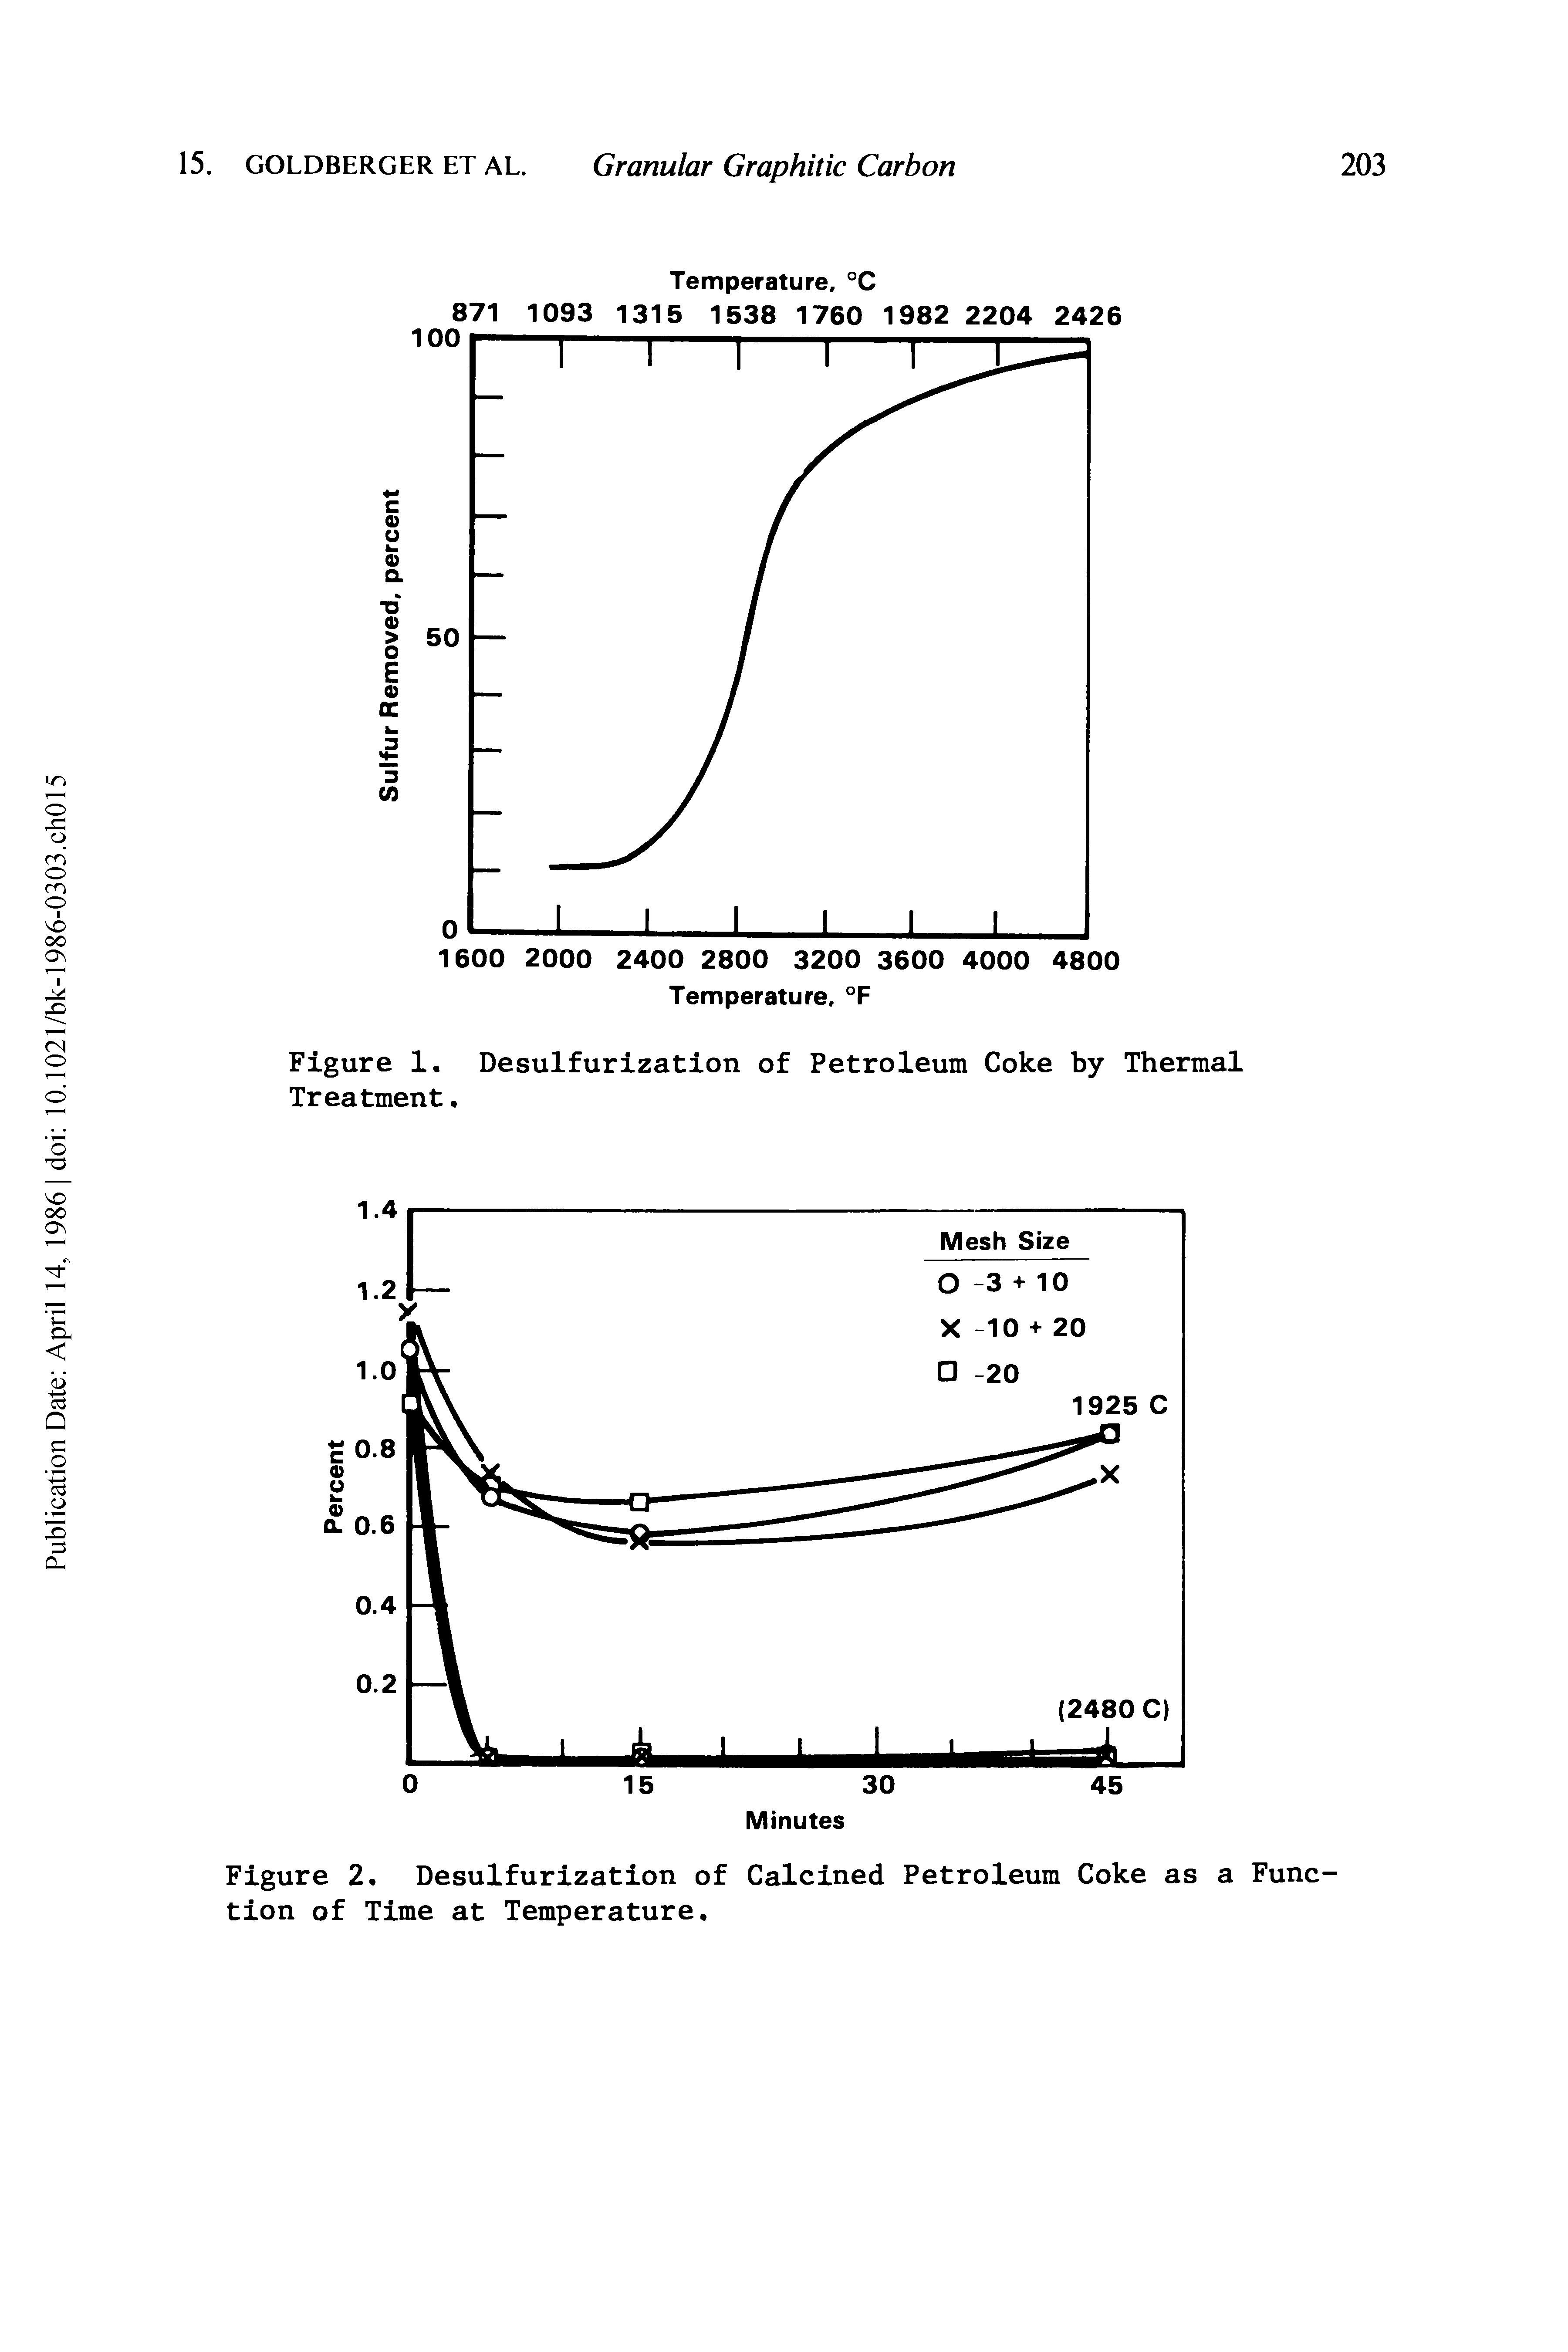 Figure 2. Desulfurization of Calcined Petroleum Coke as a Function of Time at Temperature.